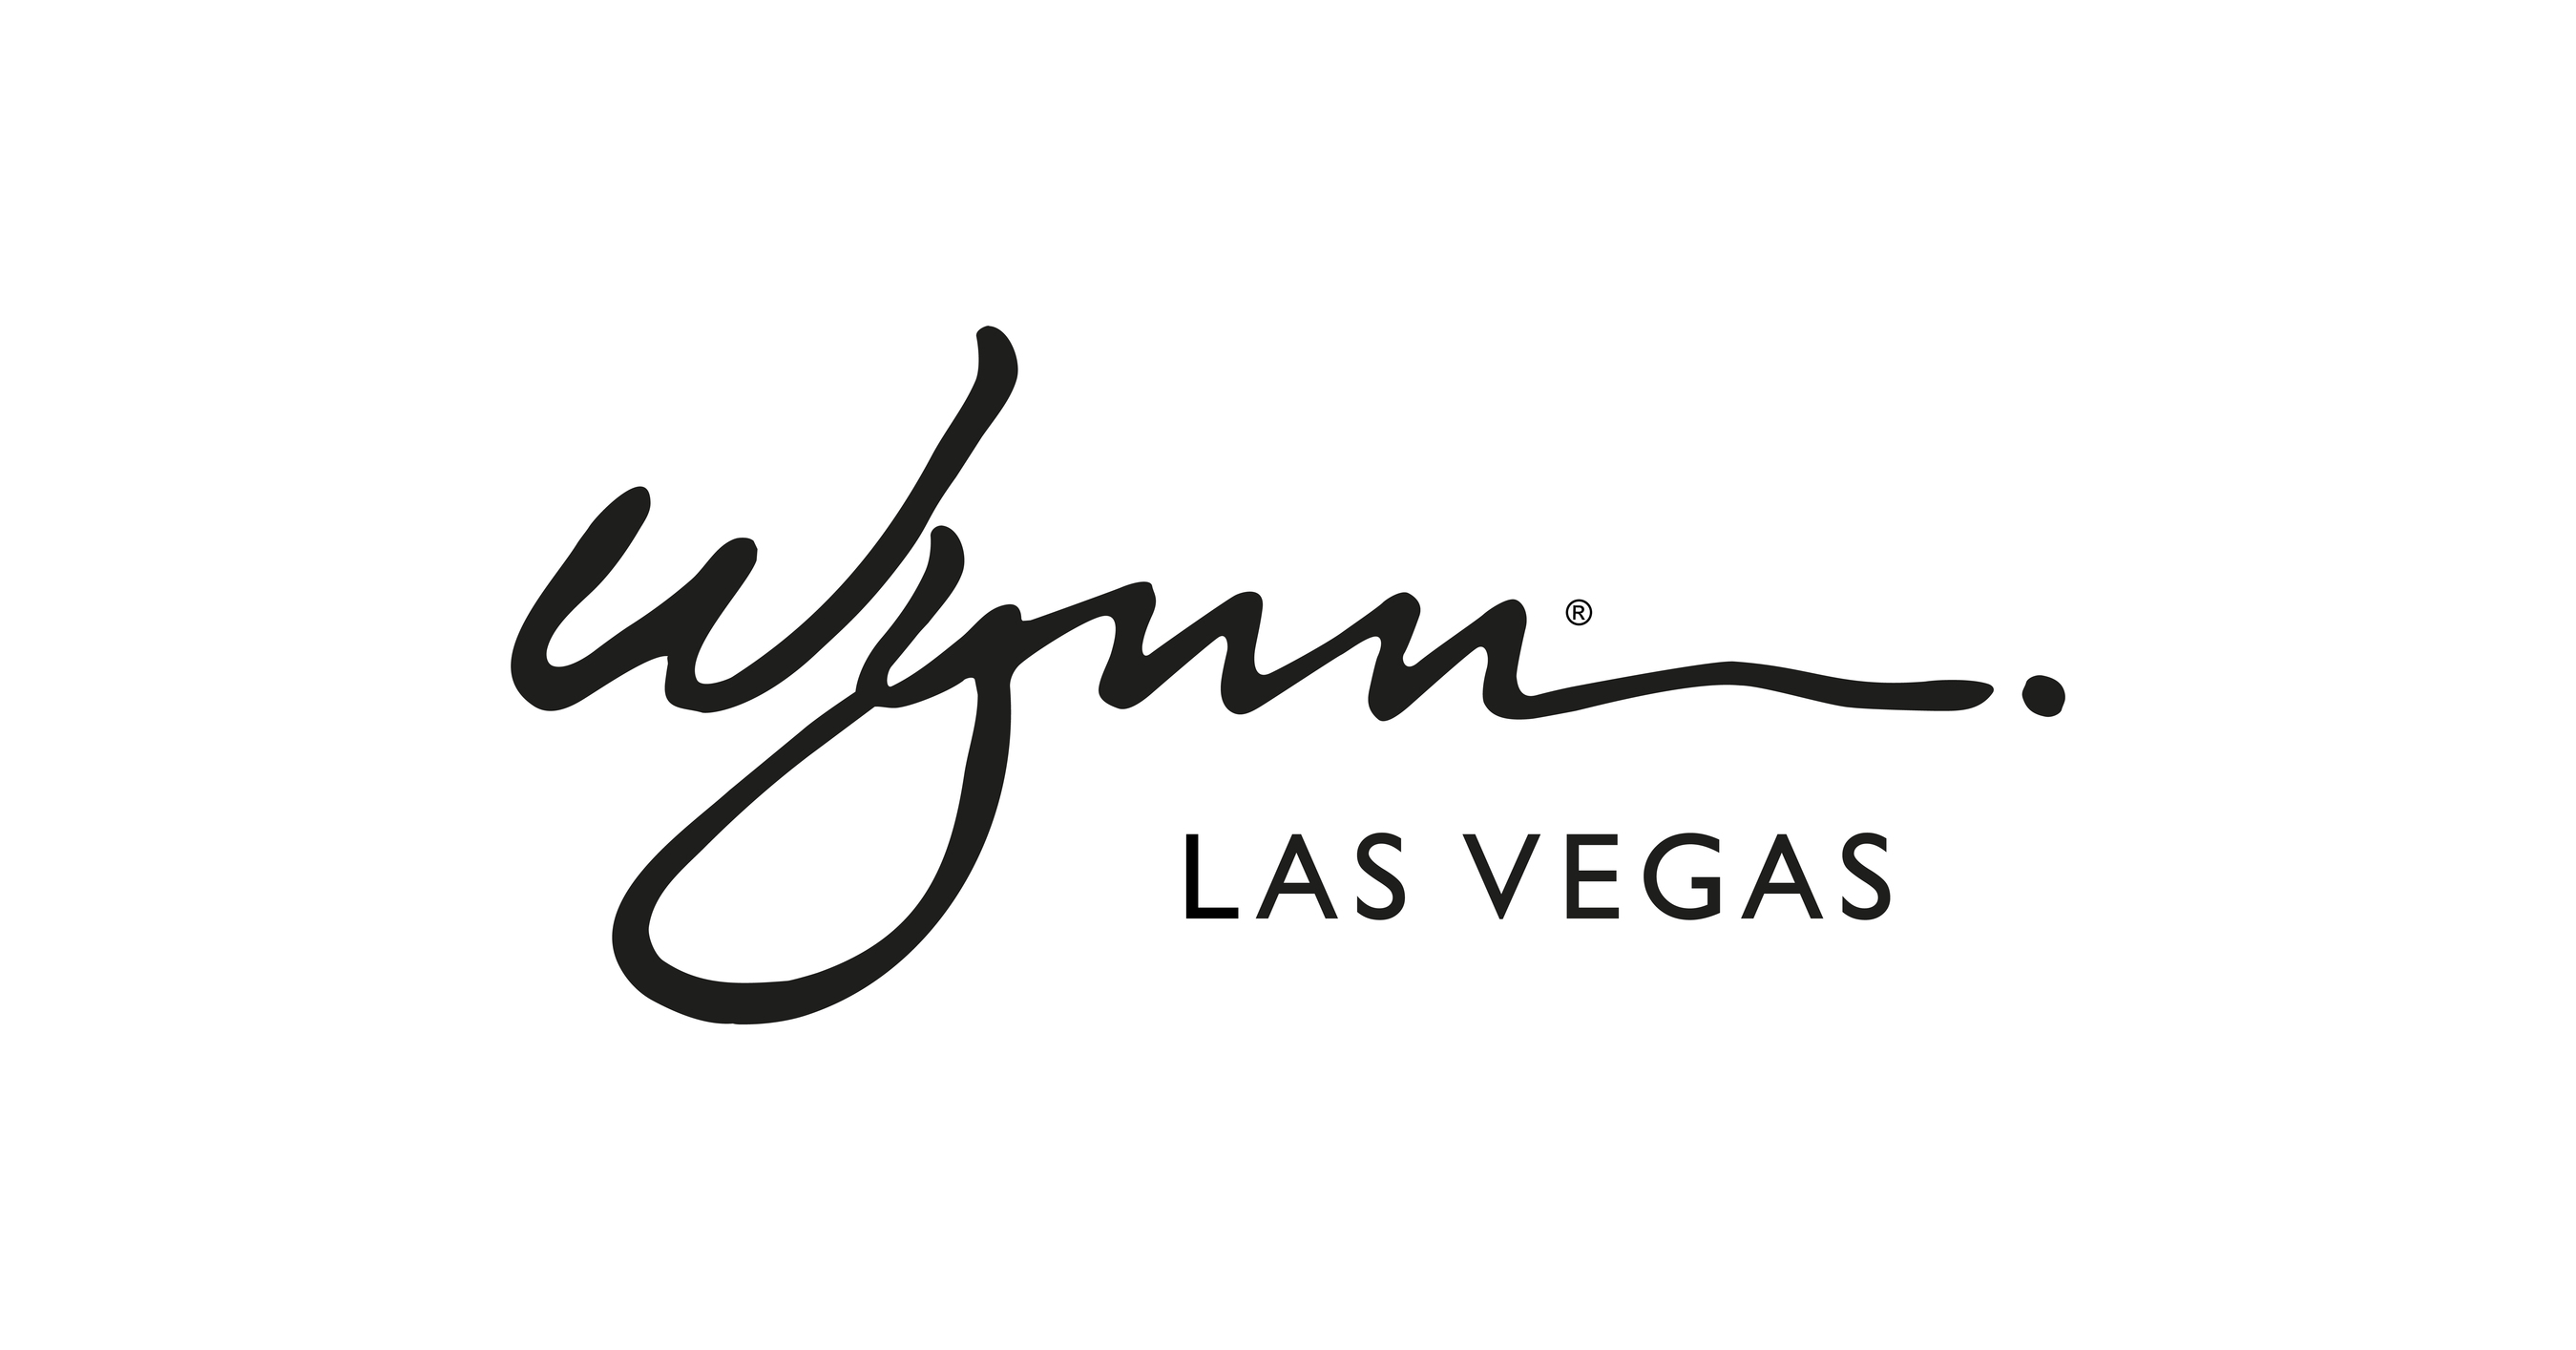 Newly-renovated Wynn Las Vegas sportsbook combines excitement, technology  and - of course - luxury 